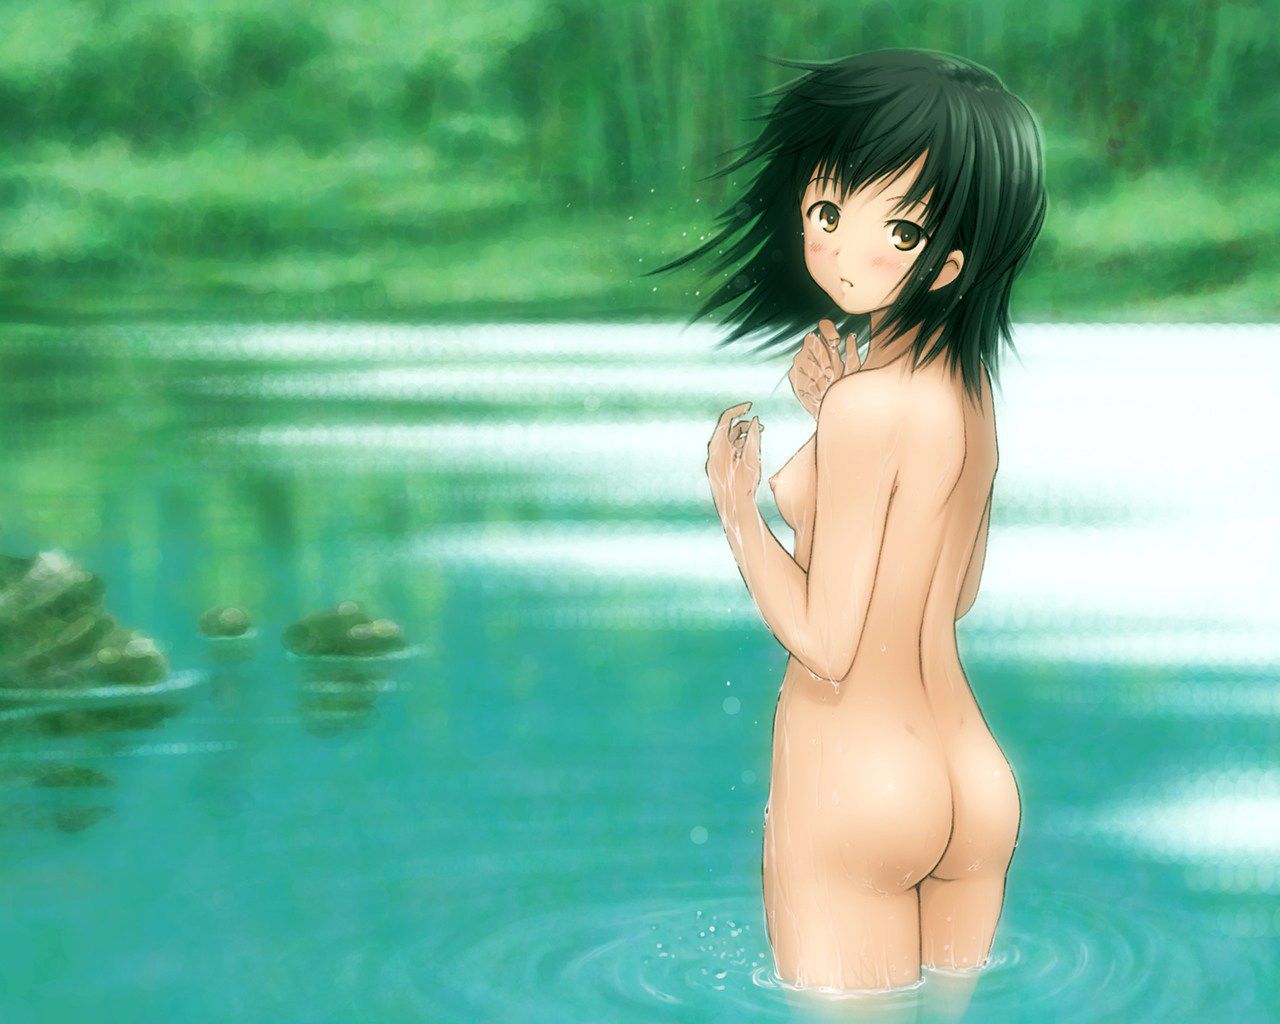 Girls naked are cute, beautiful and sly! 2D erotic image that you can't get excited 12